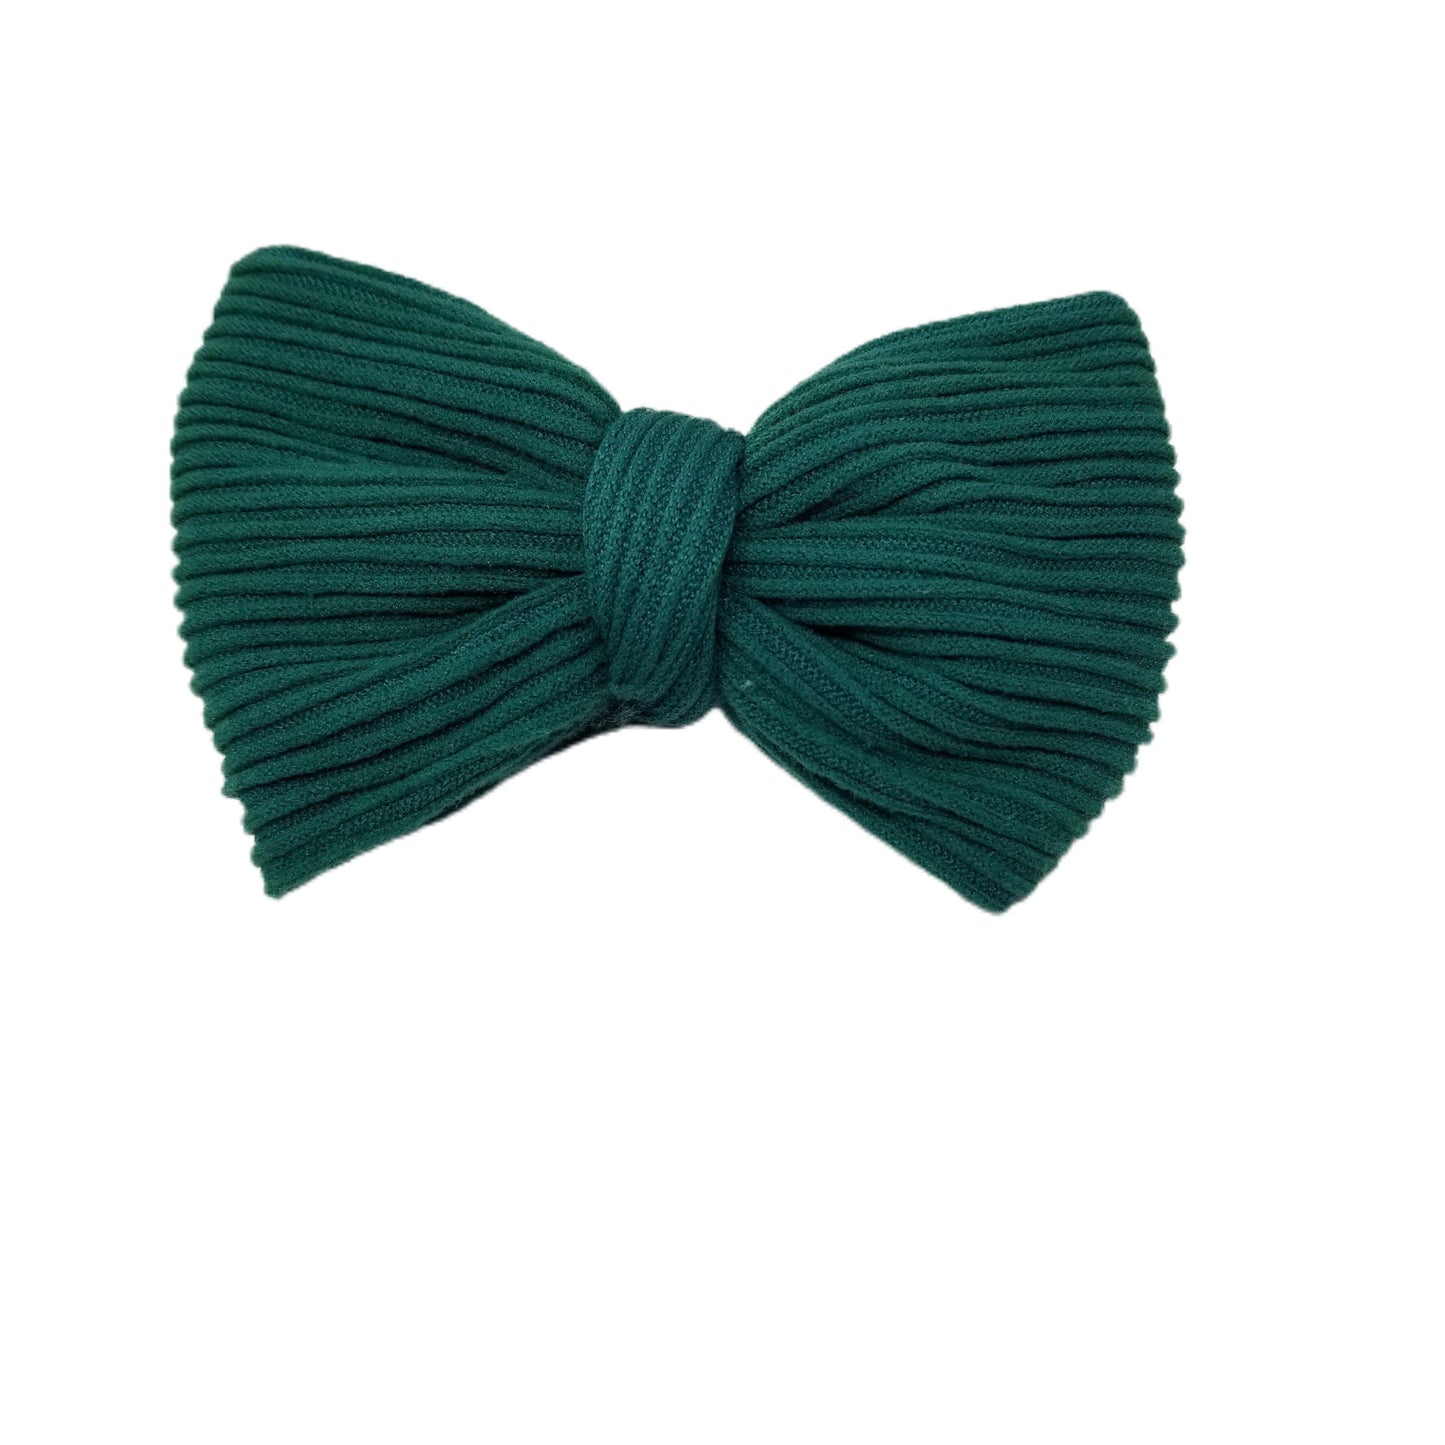 Ribbed Knit Nylon Bow 3" (pair) - Waterfall Wishes